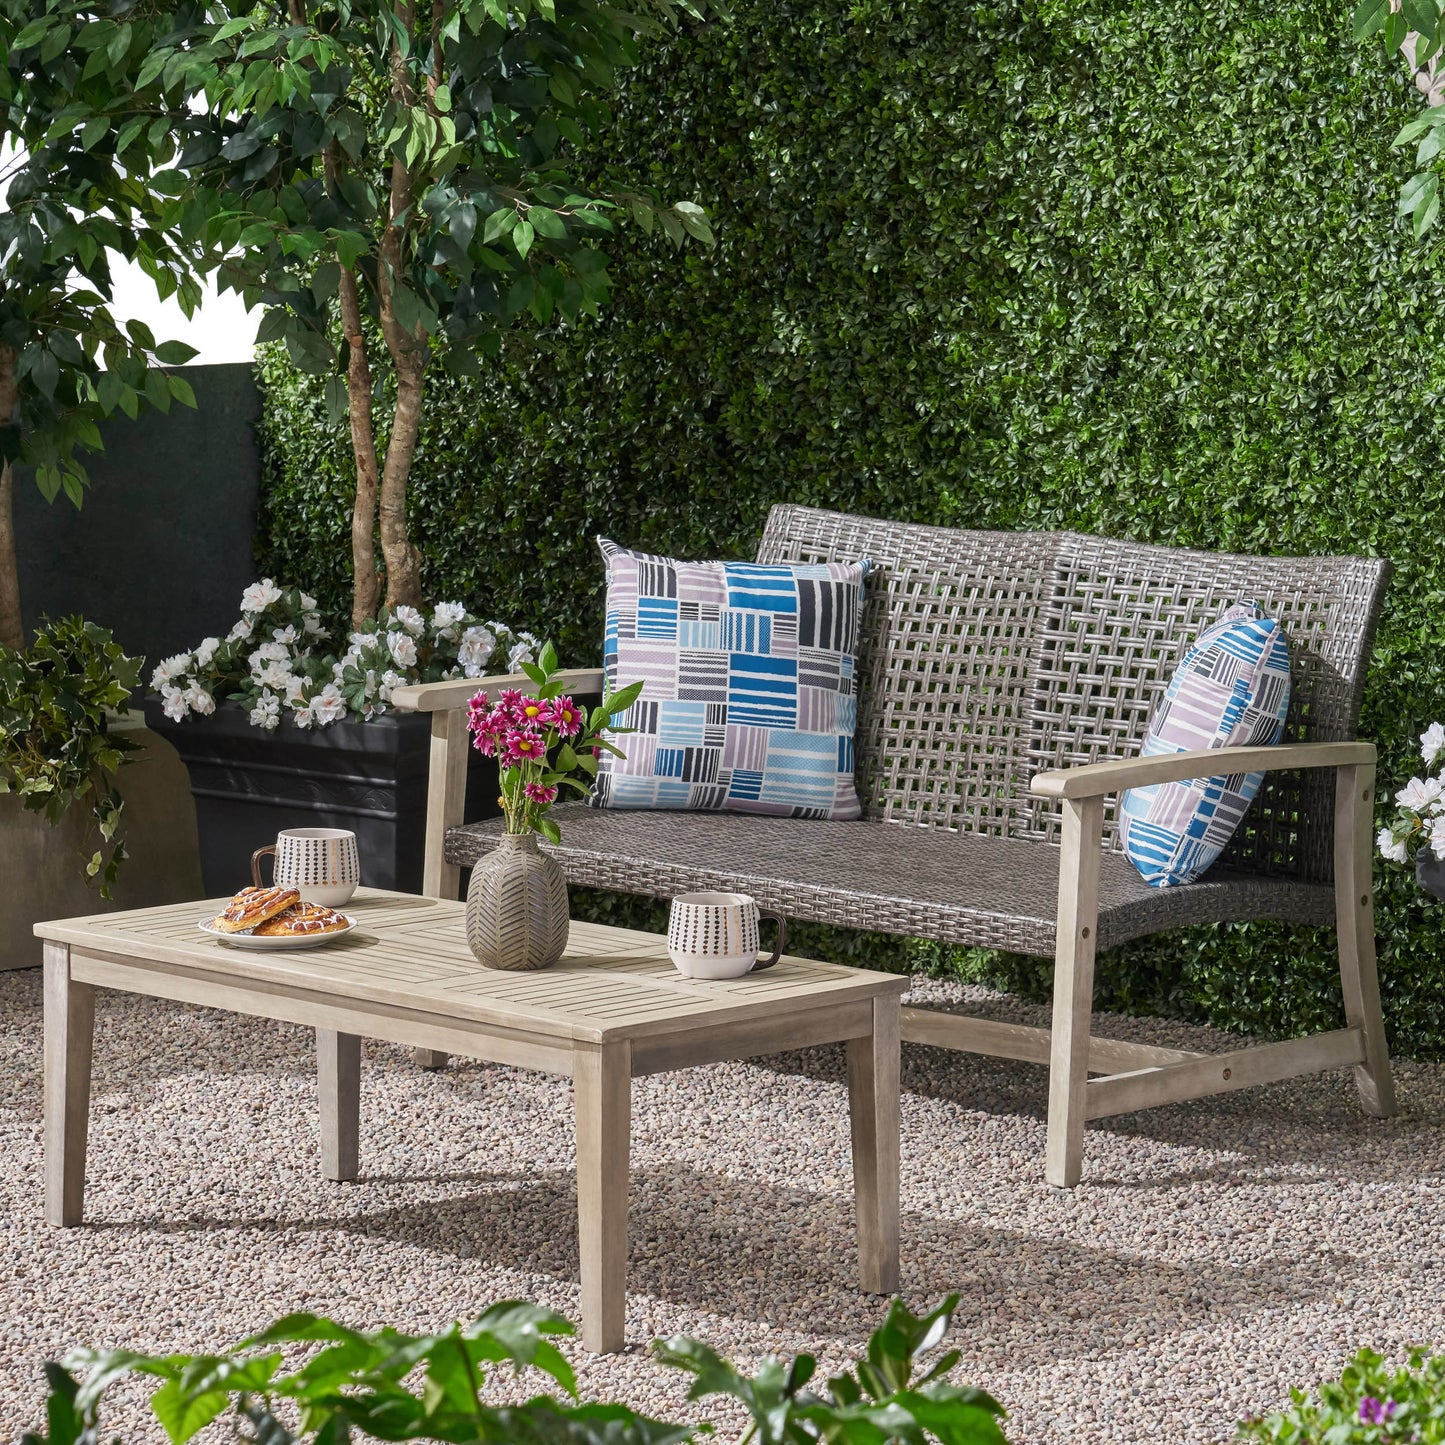 Spring Spender Outdoor Wood and Wicker Loveseat and Coffee Table Set